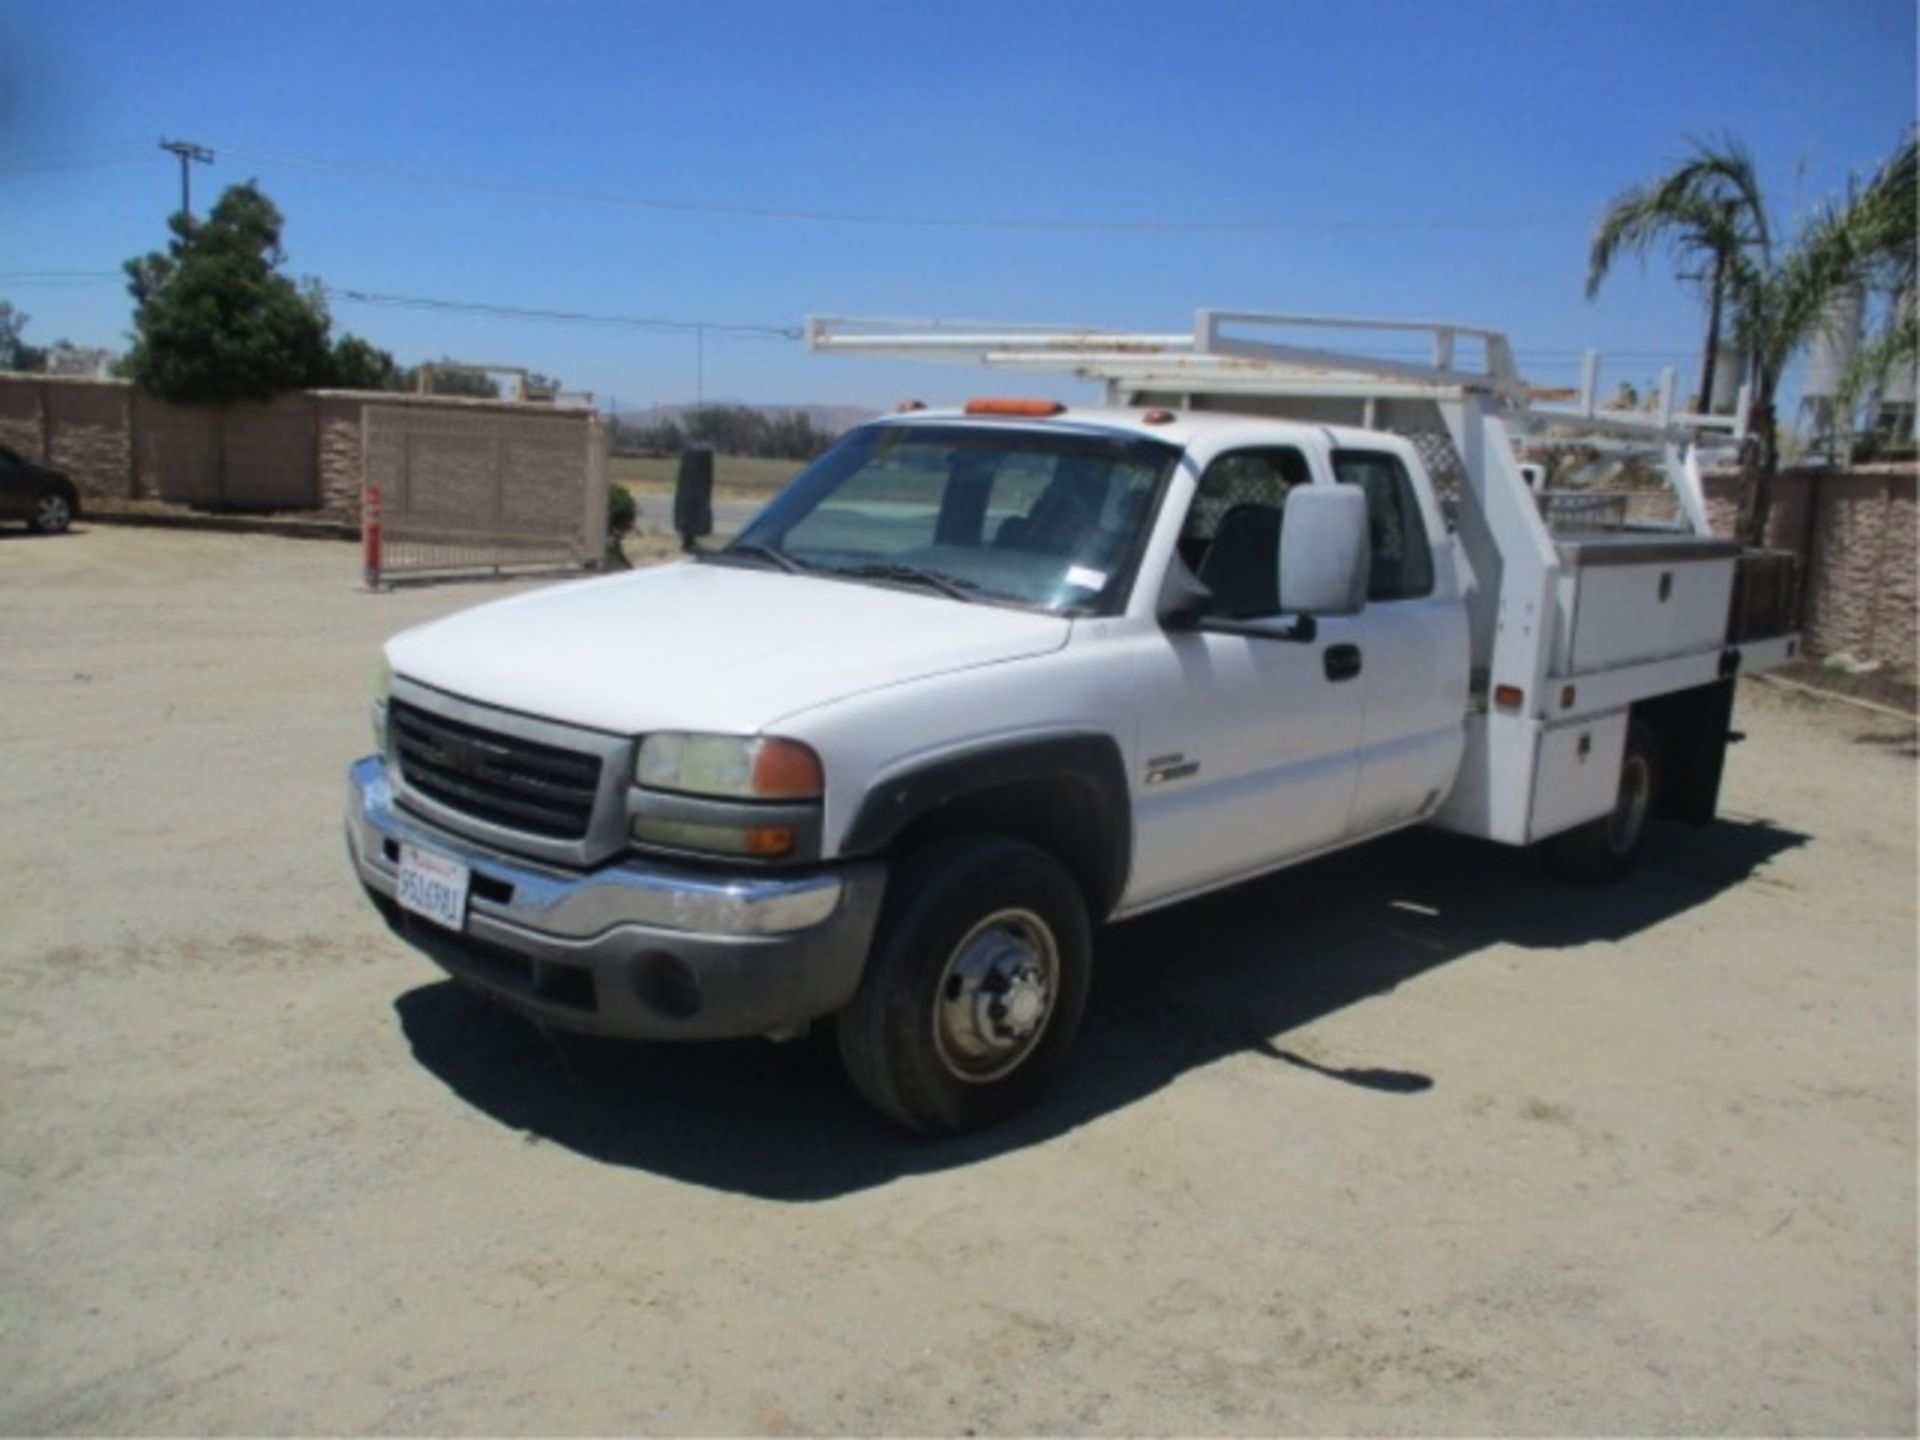 2006 Chevrolet 3500 Extended-Cab Utility Truck, 6.6L Turbo Diesel, Automatic, Tool Boxes, Lumber - Image 2 of 71